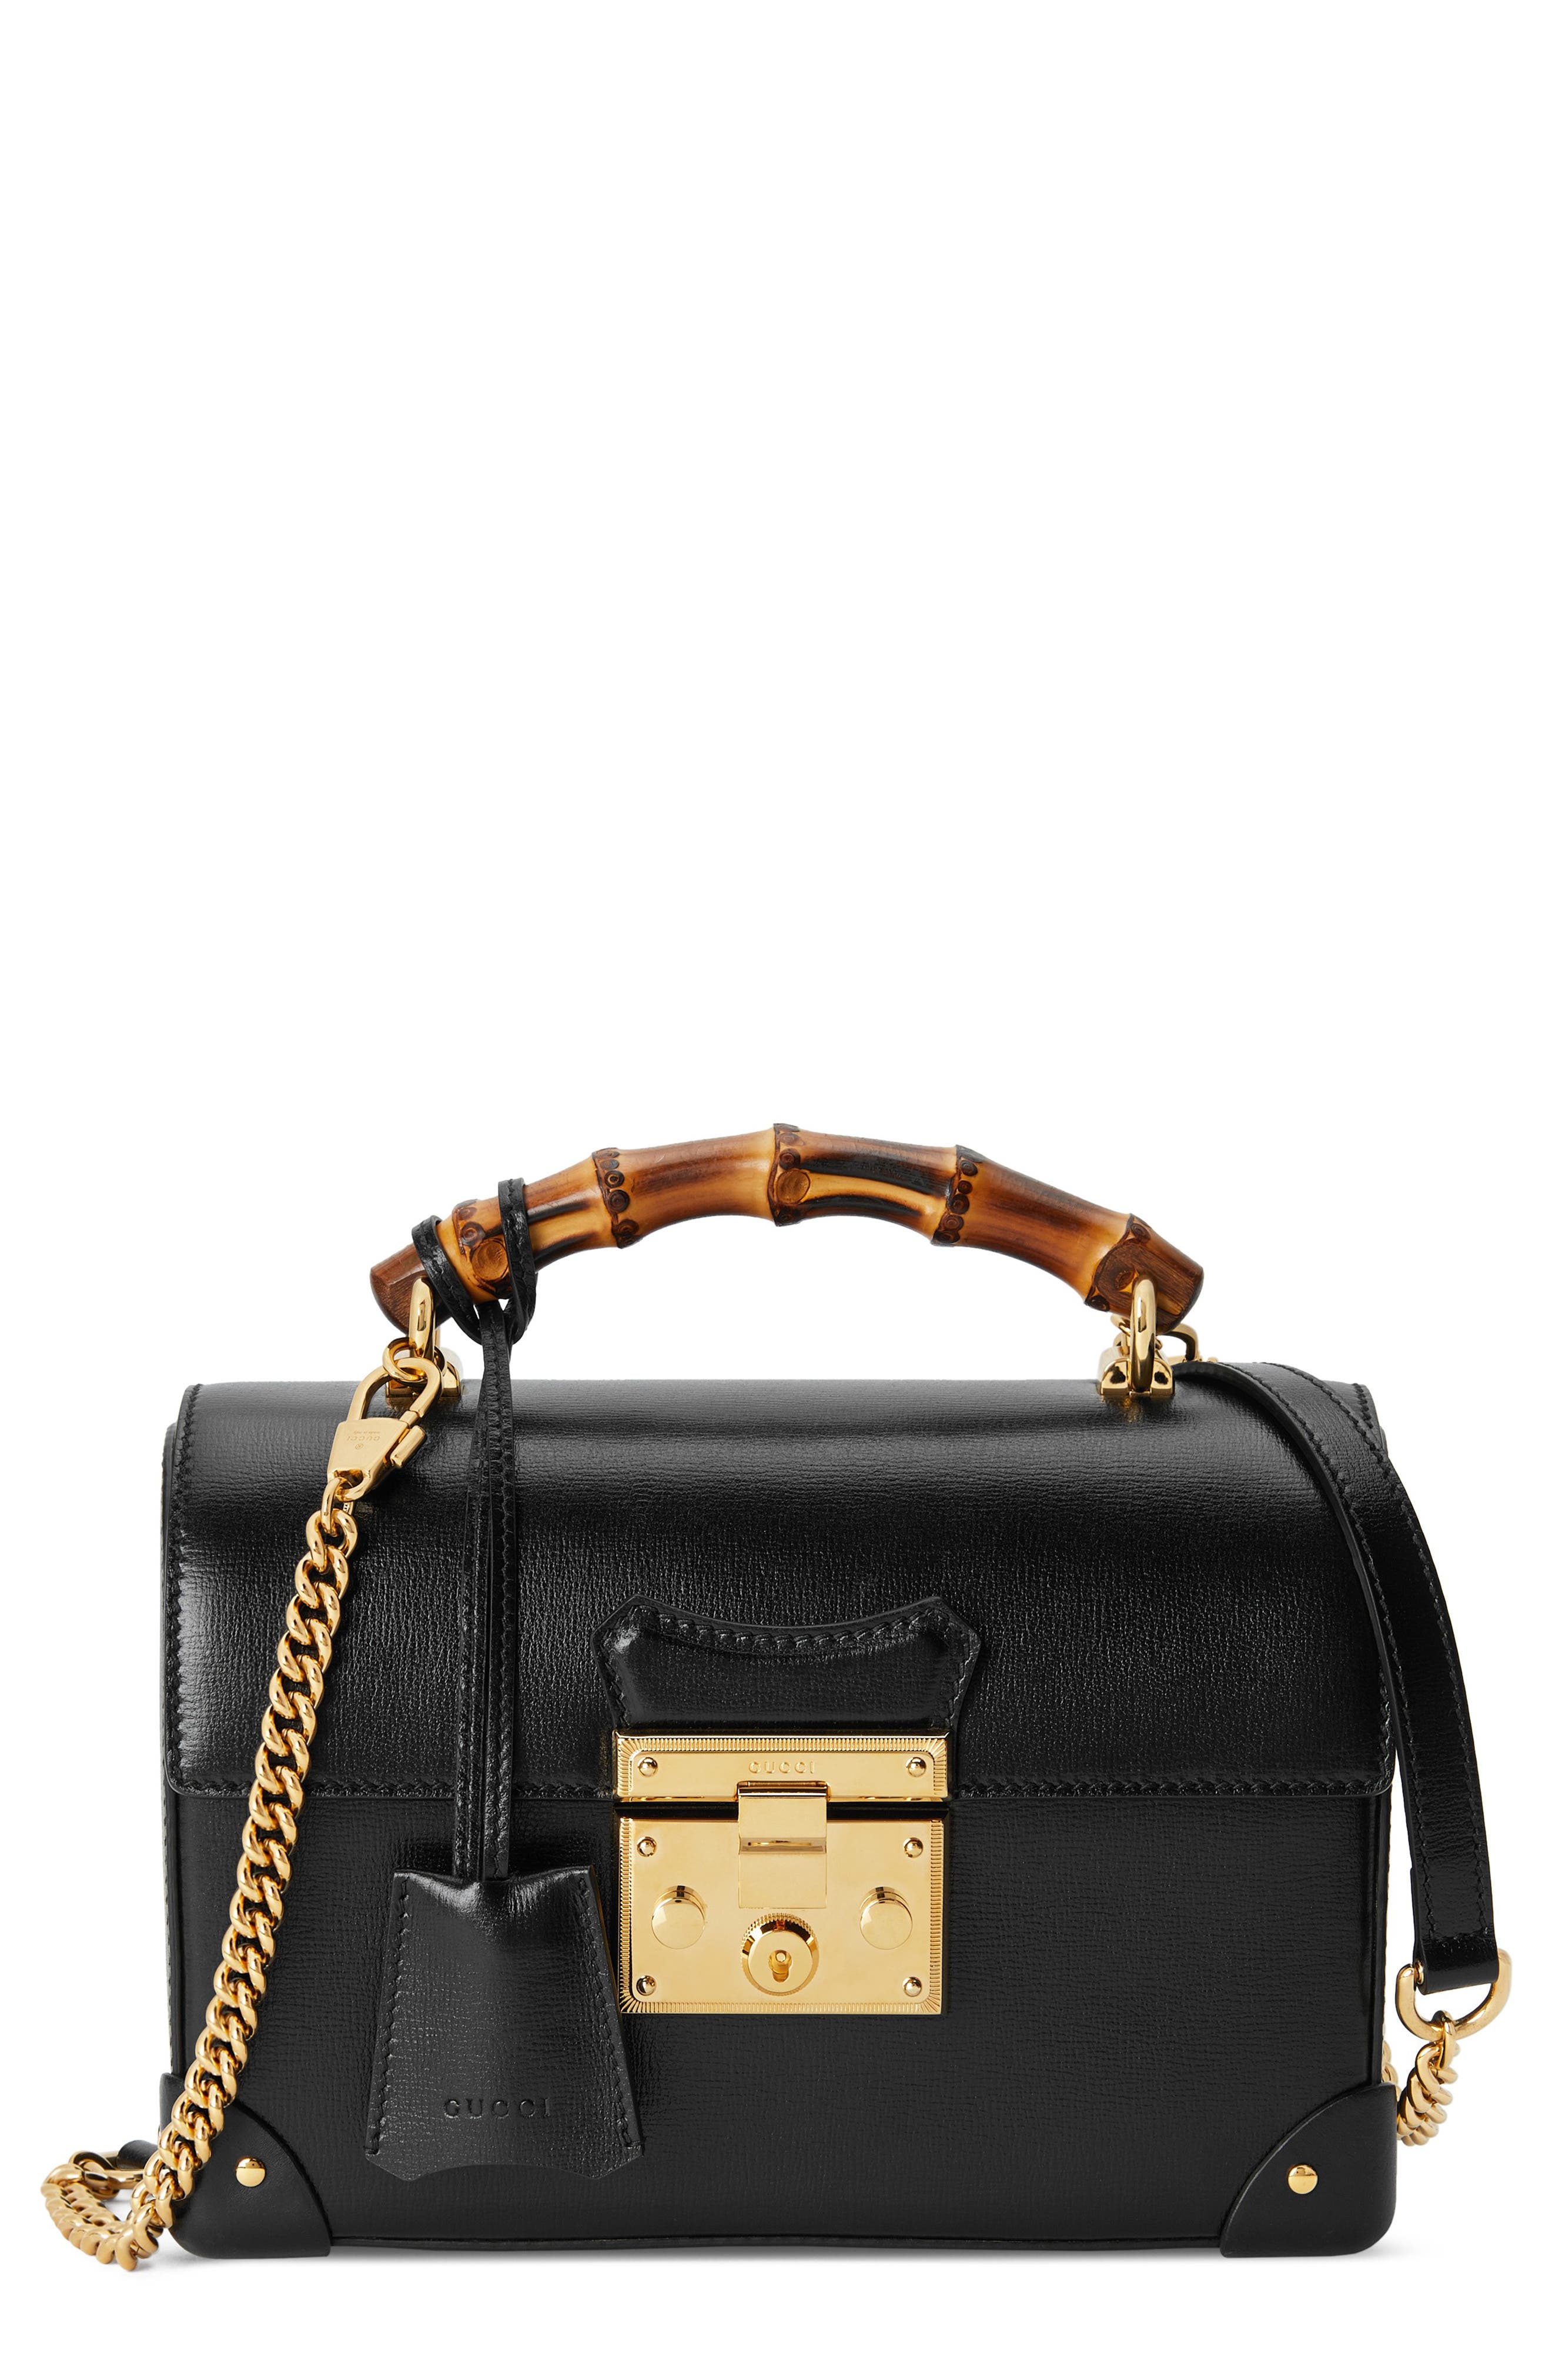 gucci bag with bamboo handle